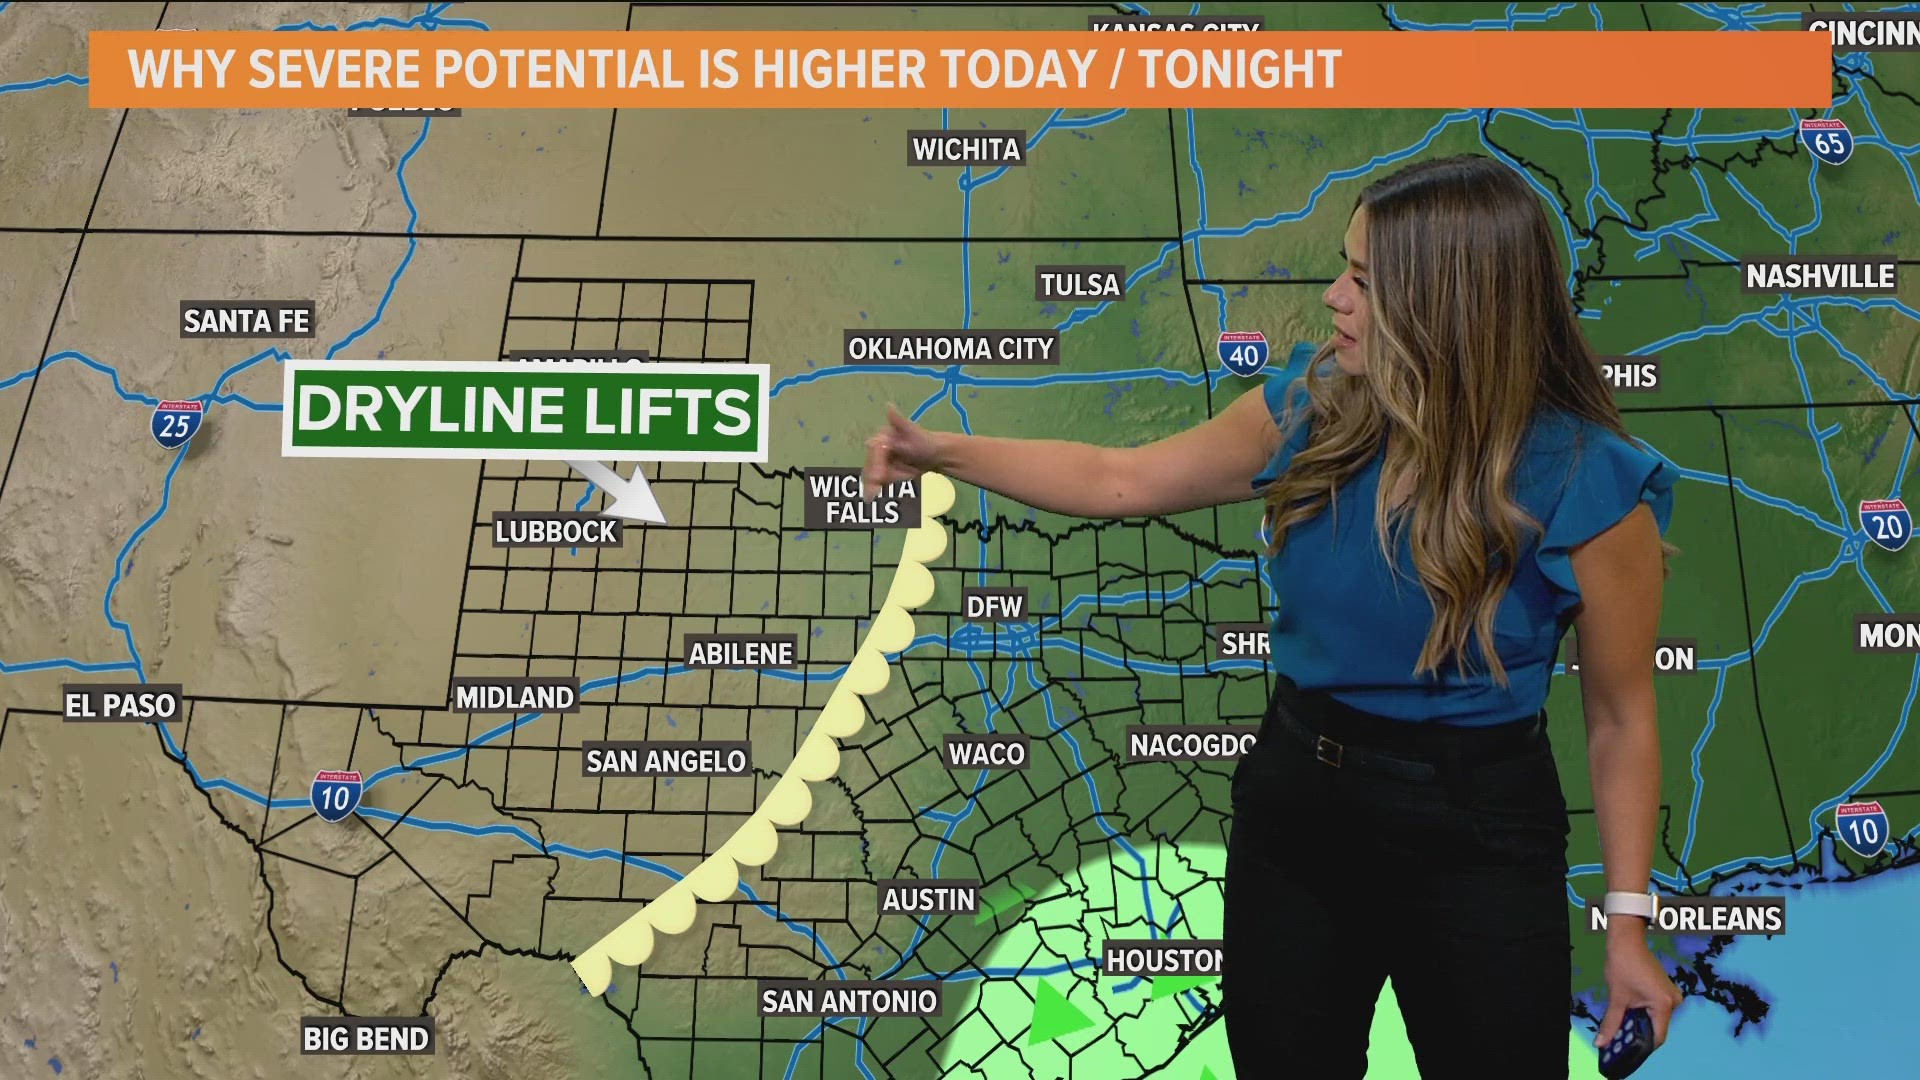 WFAA meteorologist Mariel Ruiz breaks down the factors playing into the severe weather chances for North Texas Tuesday night.